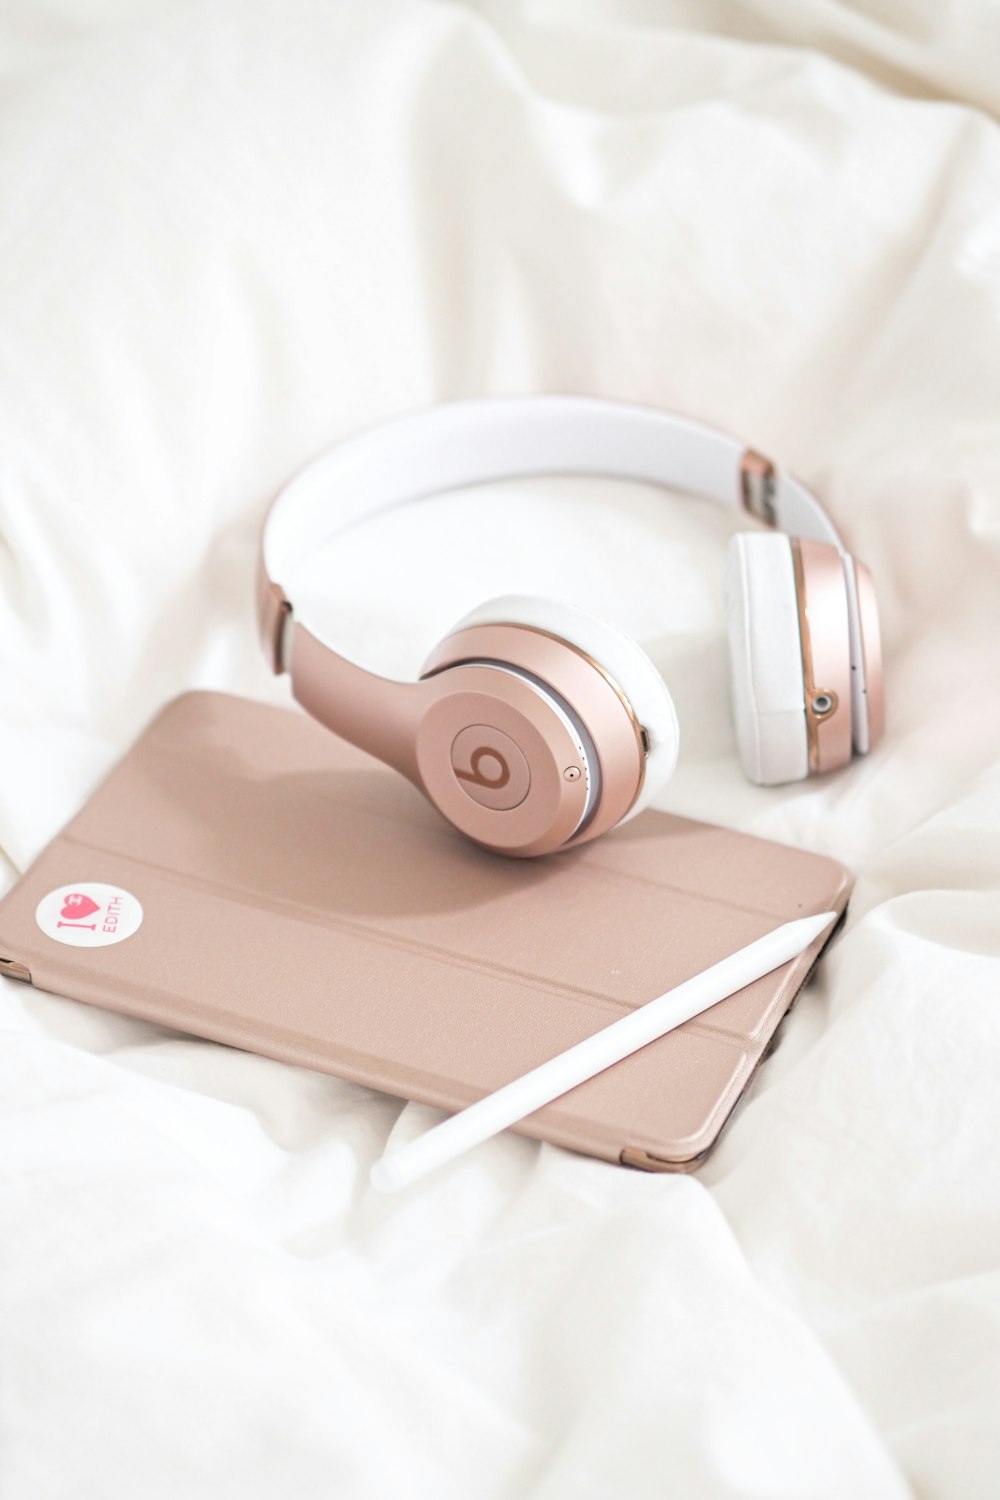 brown and white beats by dr dre headphones on white ipad photo – Free Brown  Image on Unsplash